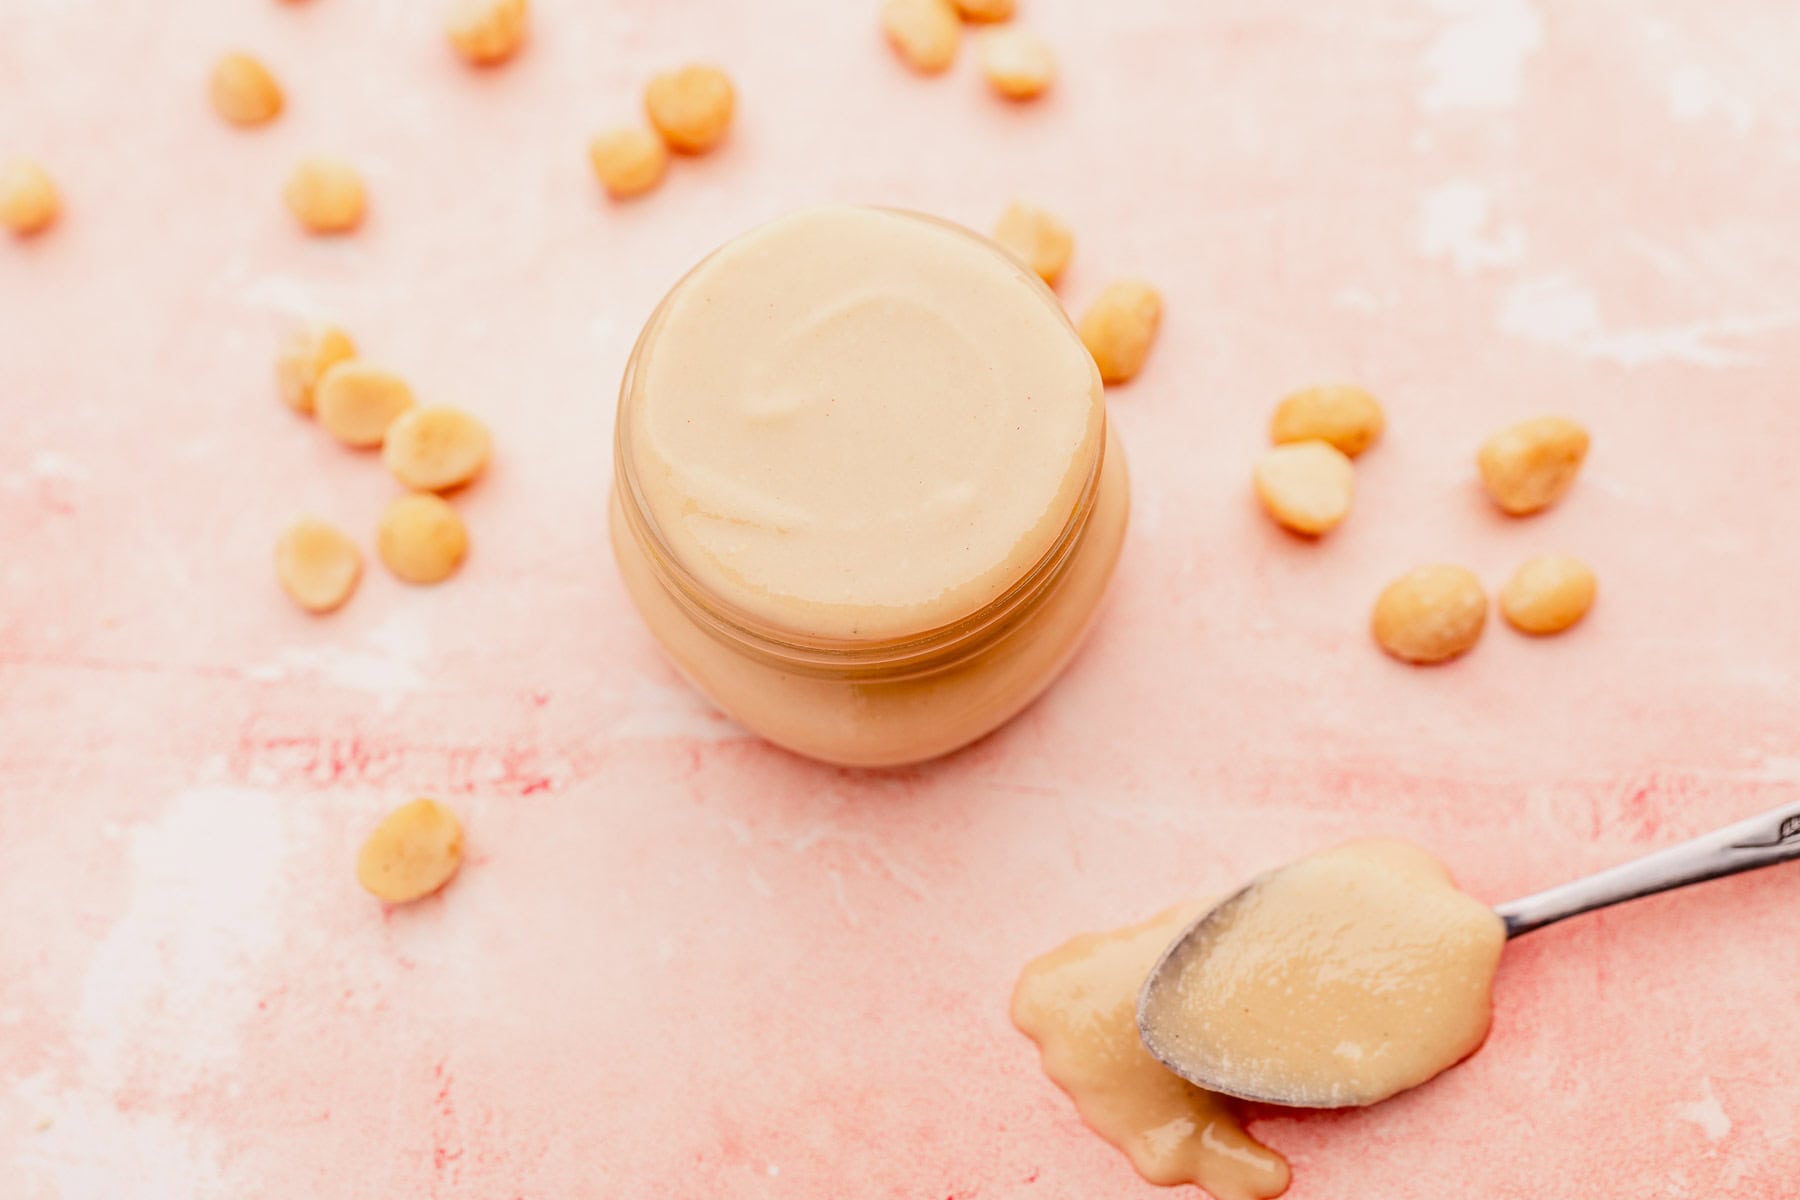 Jar of smooth macadamia nut butter with a spoon beside it, and scattered peanuts on a pink surface.